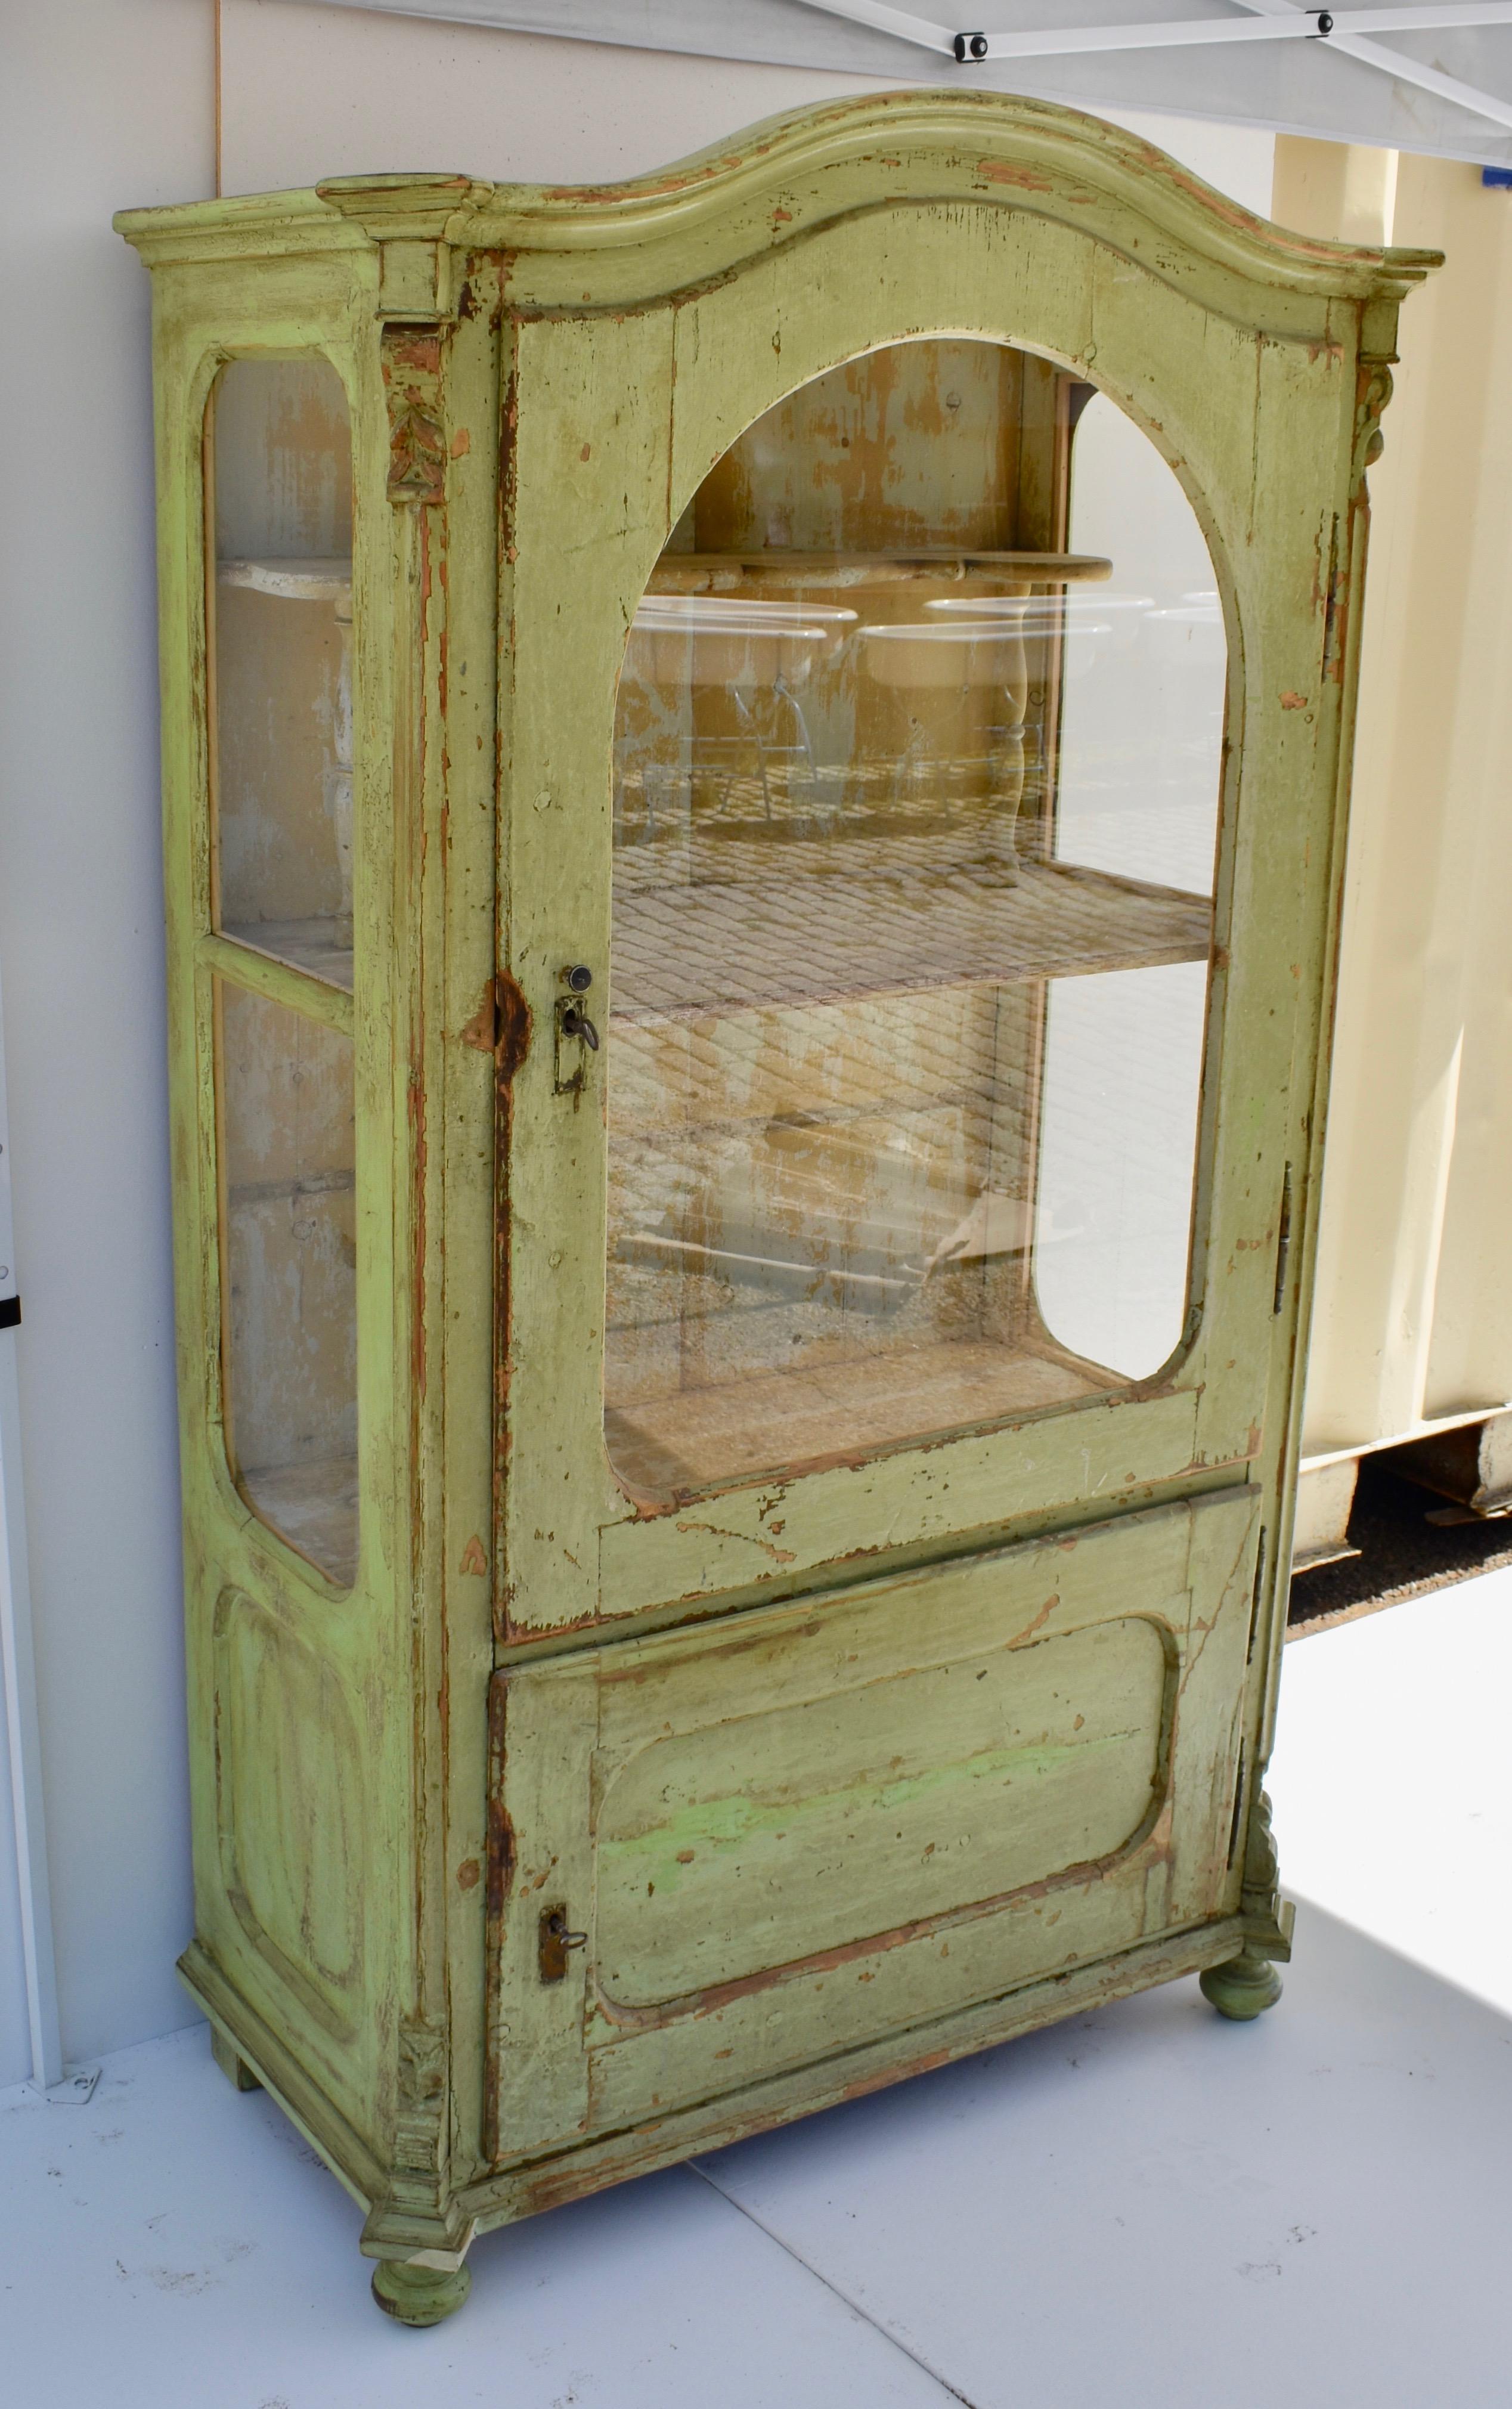 This interesting two door vitrine or glazed cabinet features a bonnet top above an arched glazed door with a flat paneled door beneath, both mounted on wide-swinging fiche hinges. The upper interior has a central full shelf with a decorative gallery